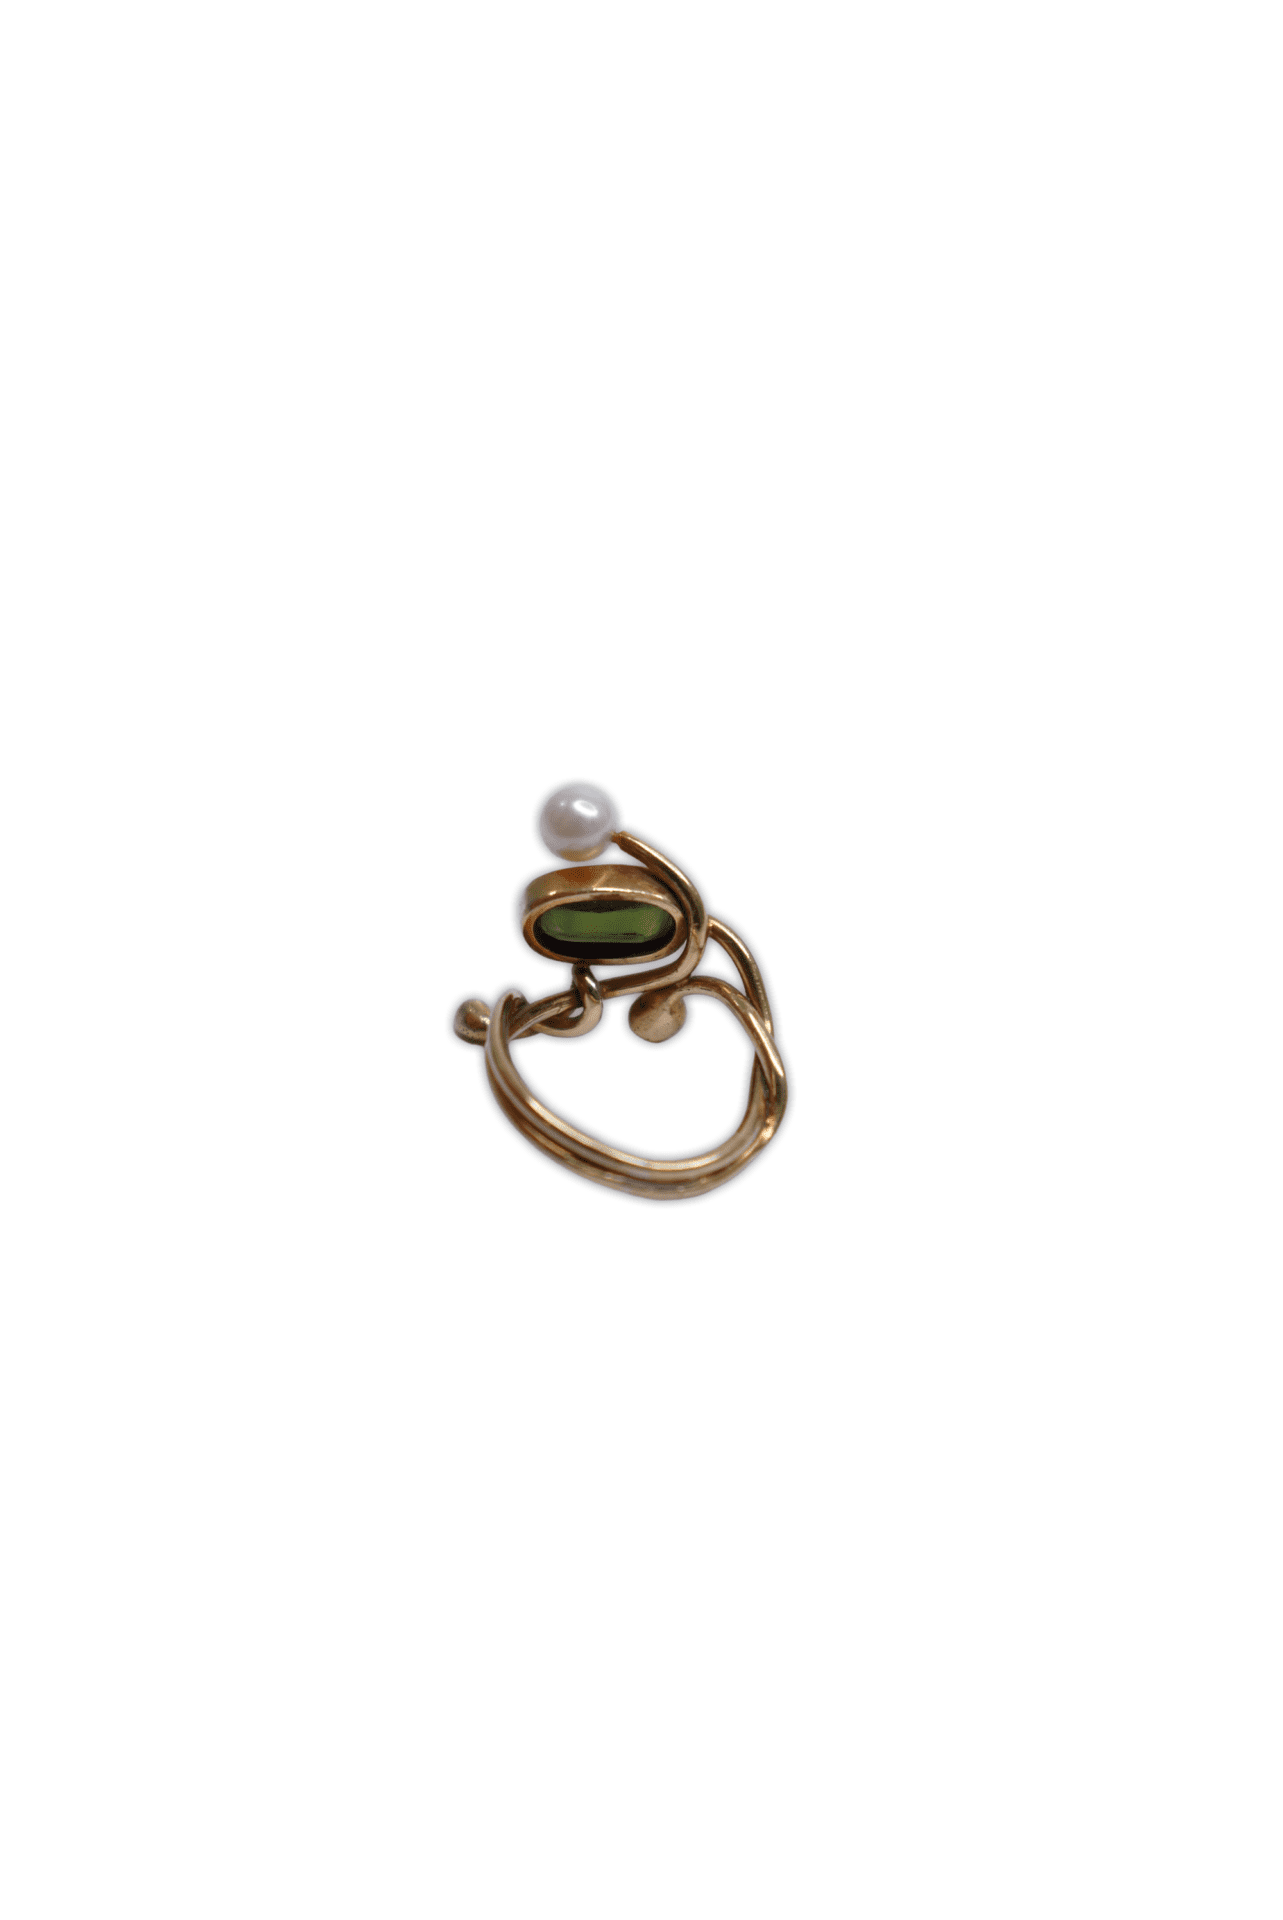 Gorgeous, intertwined 14-carat gold band design featuring a stunning green sapphire, and a small, cultured pearl. Dove Hospice and Wellness.